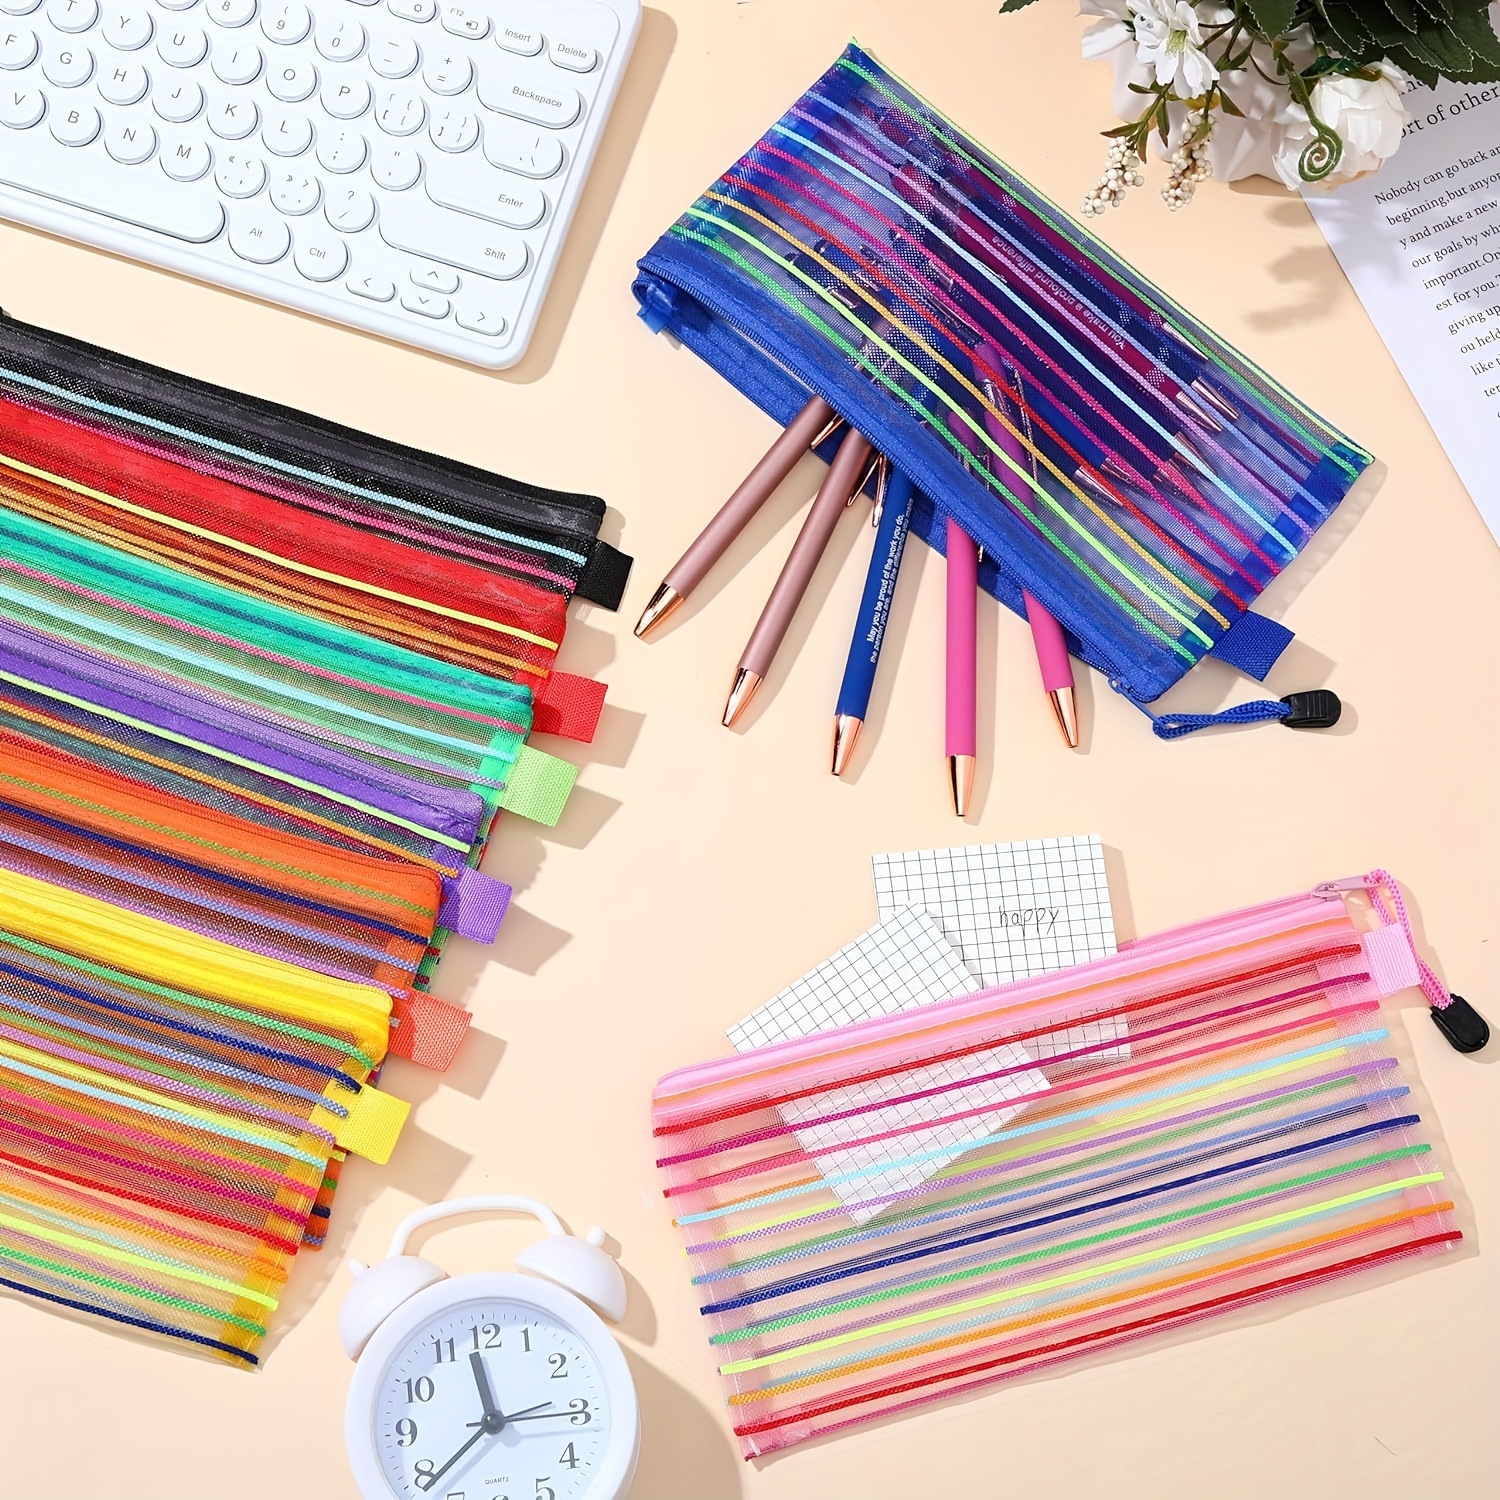 6pcs Colors Zipper Mesh Pouch Pencil Pouch Storage Pouches Multipurpose  Travel Bags For Office Pen Cosmetic Makeup Classroom Supplies Daily Storage  B6